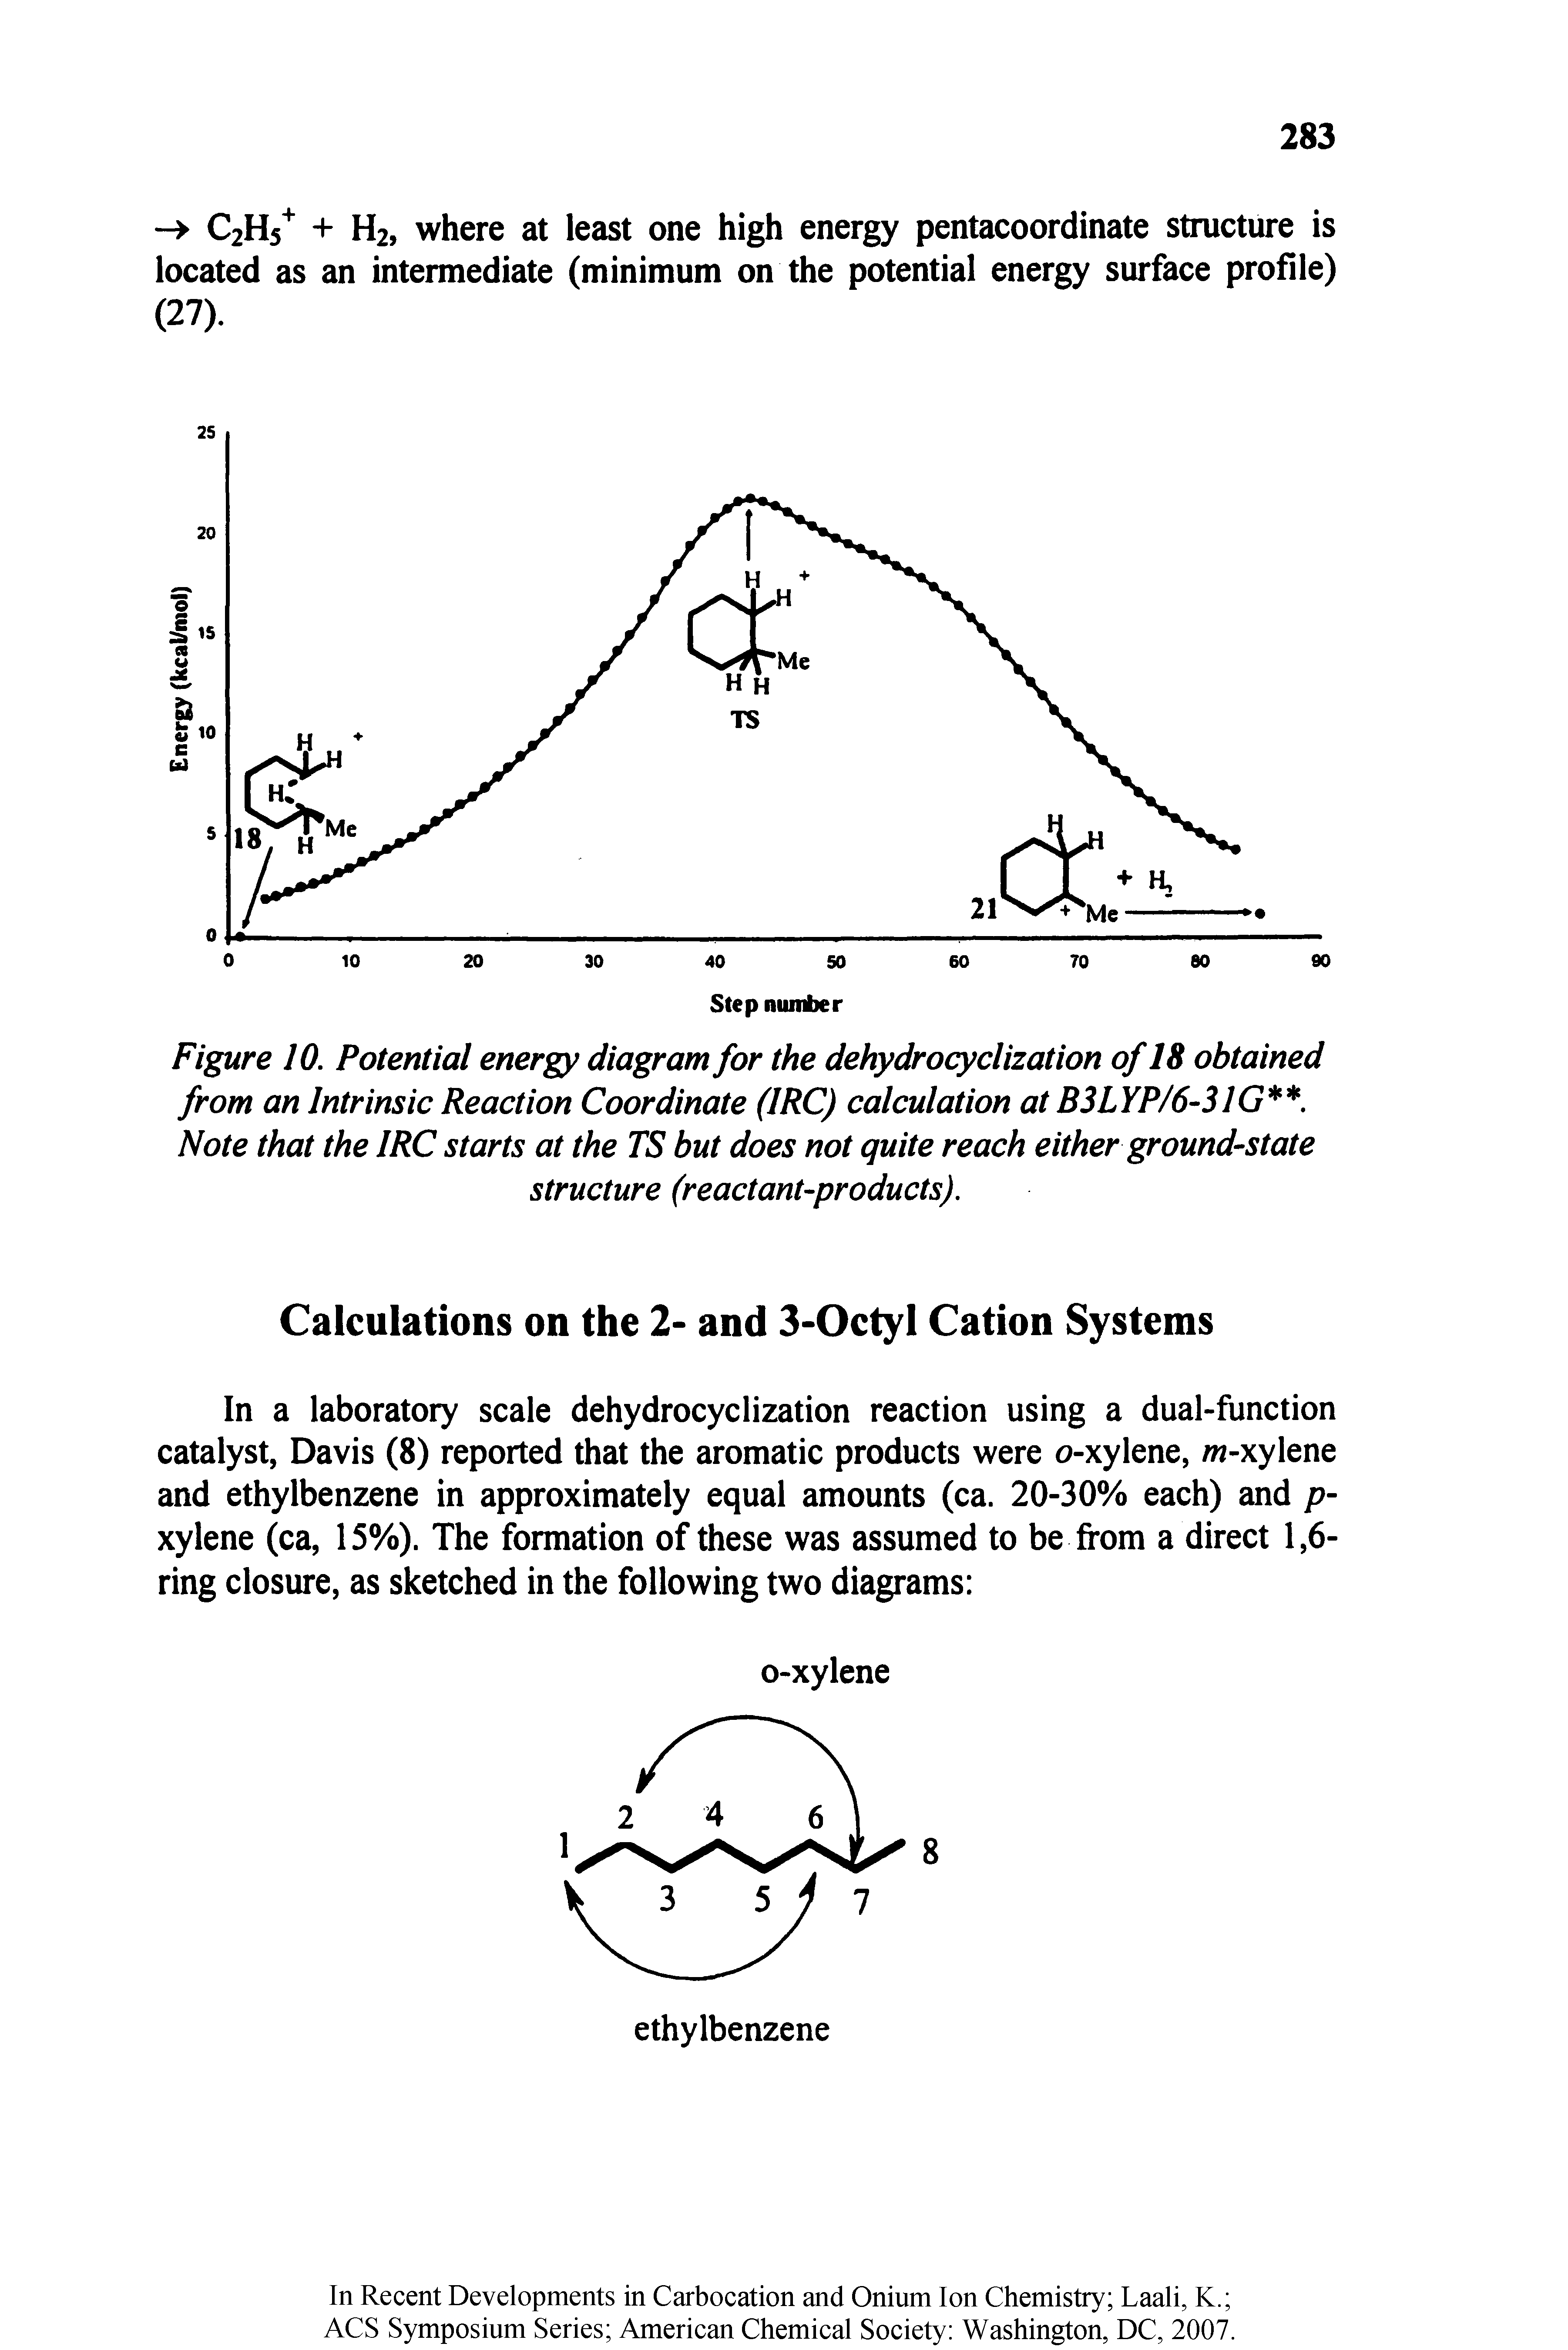 Figure 10. Potential energy diagram for the dehydrocyclization of 18 obtained from an Intrinsic Reaction Coordinate (IRC) calculation at B3LYP/6-31G. Note that the IRC starts at the TS but does not quite reach either ground-state structure (reactant-products).